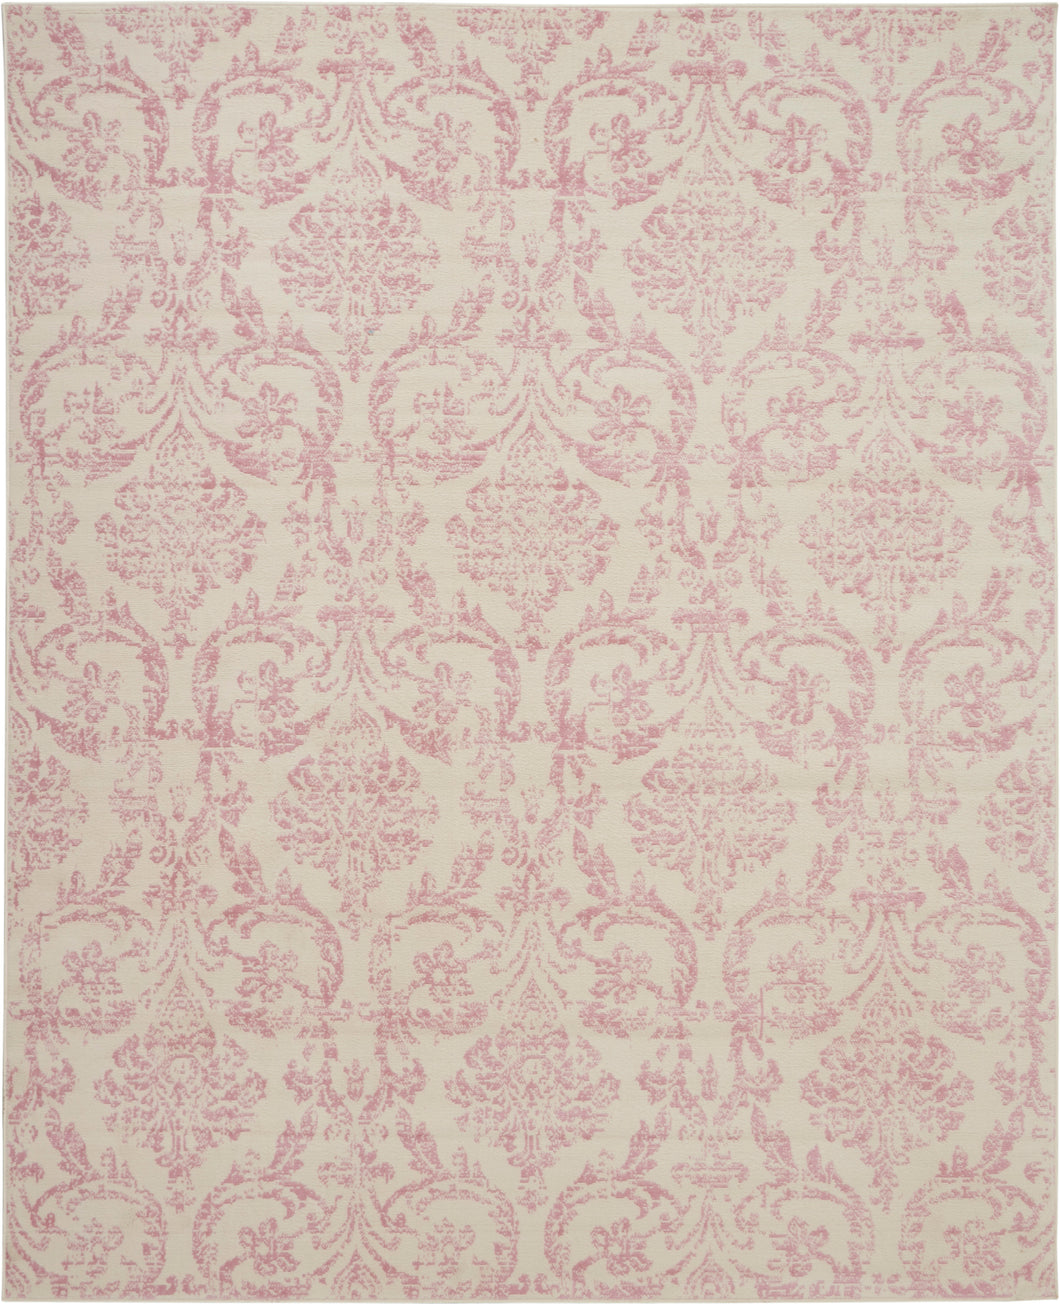 Nourison Jubilant 7'x10' White and Pink Area Rug JUB09 Ivory/Pink